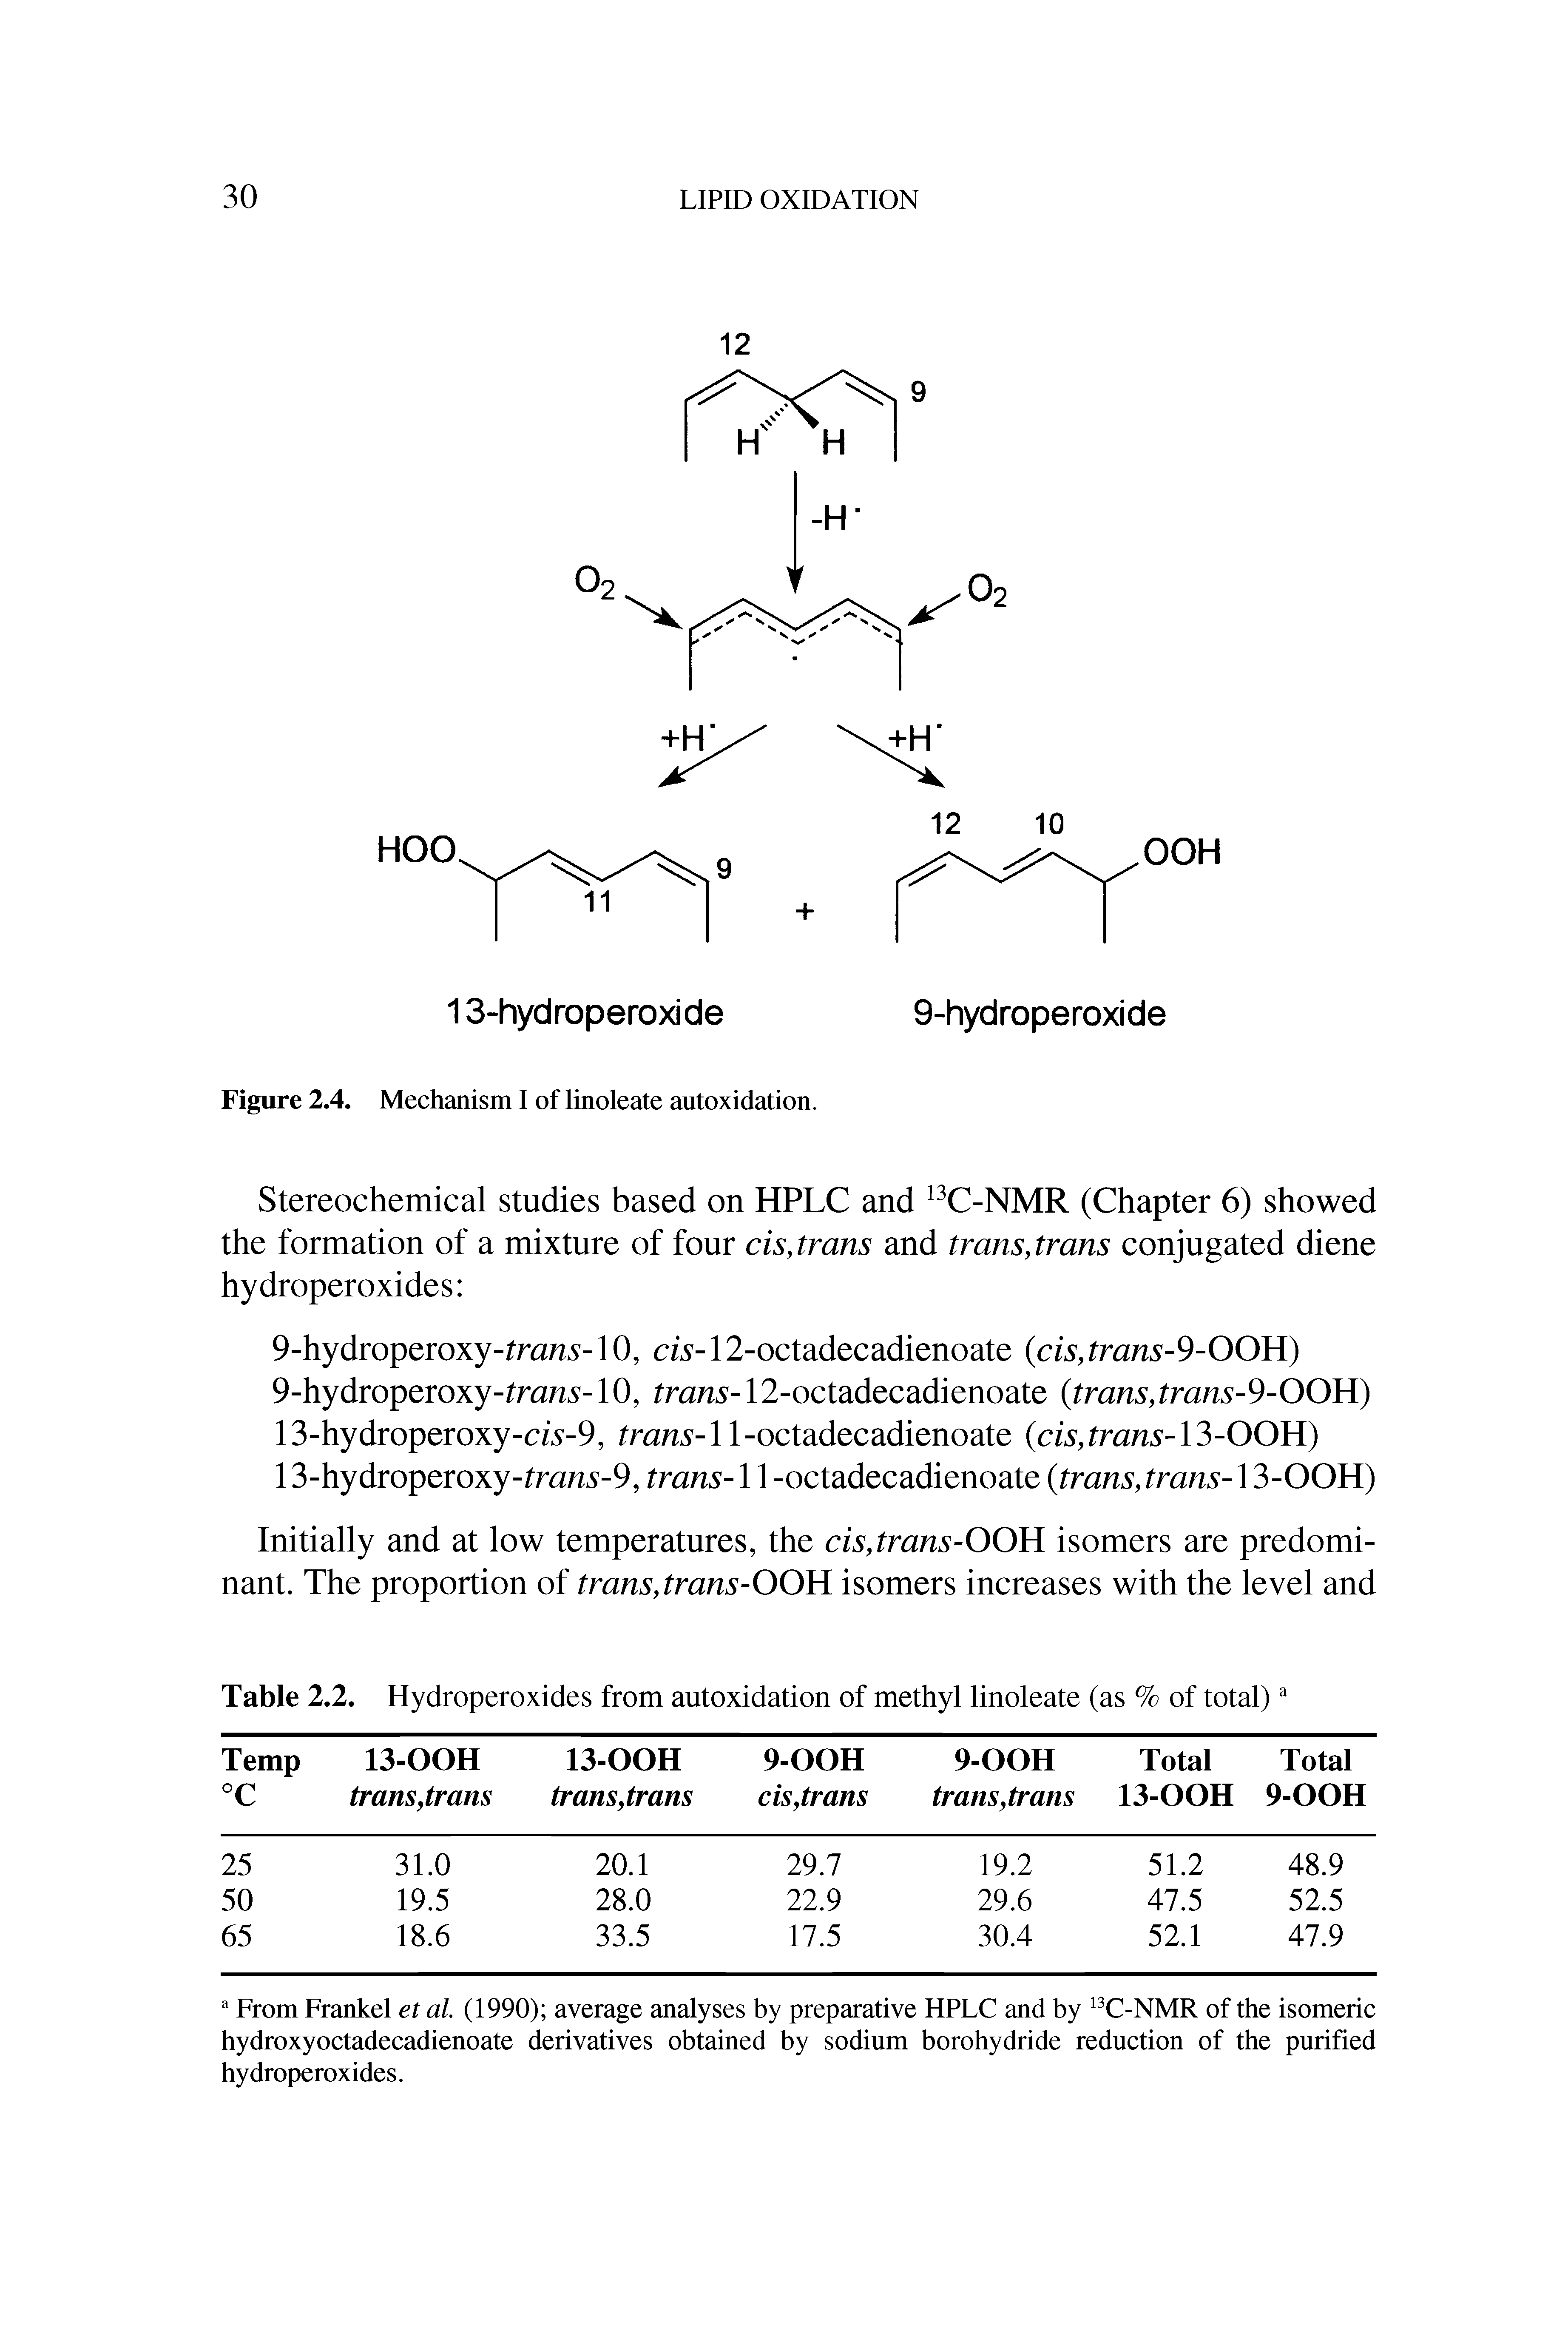 Table 2.2. Hydroperoxides from autoxidation of methyl linoleate (as % of total) ...